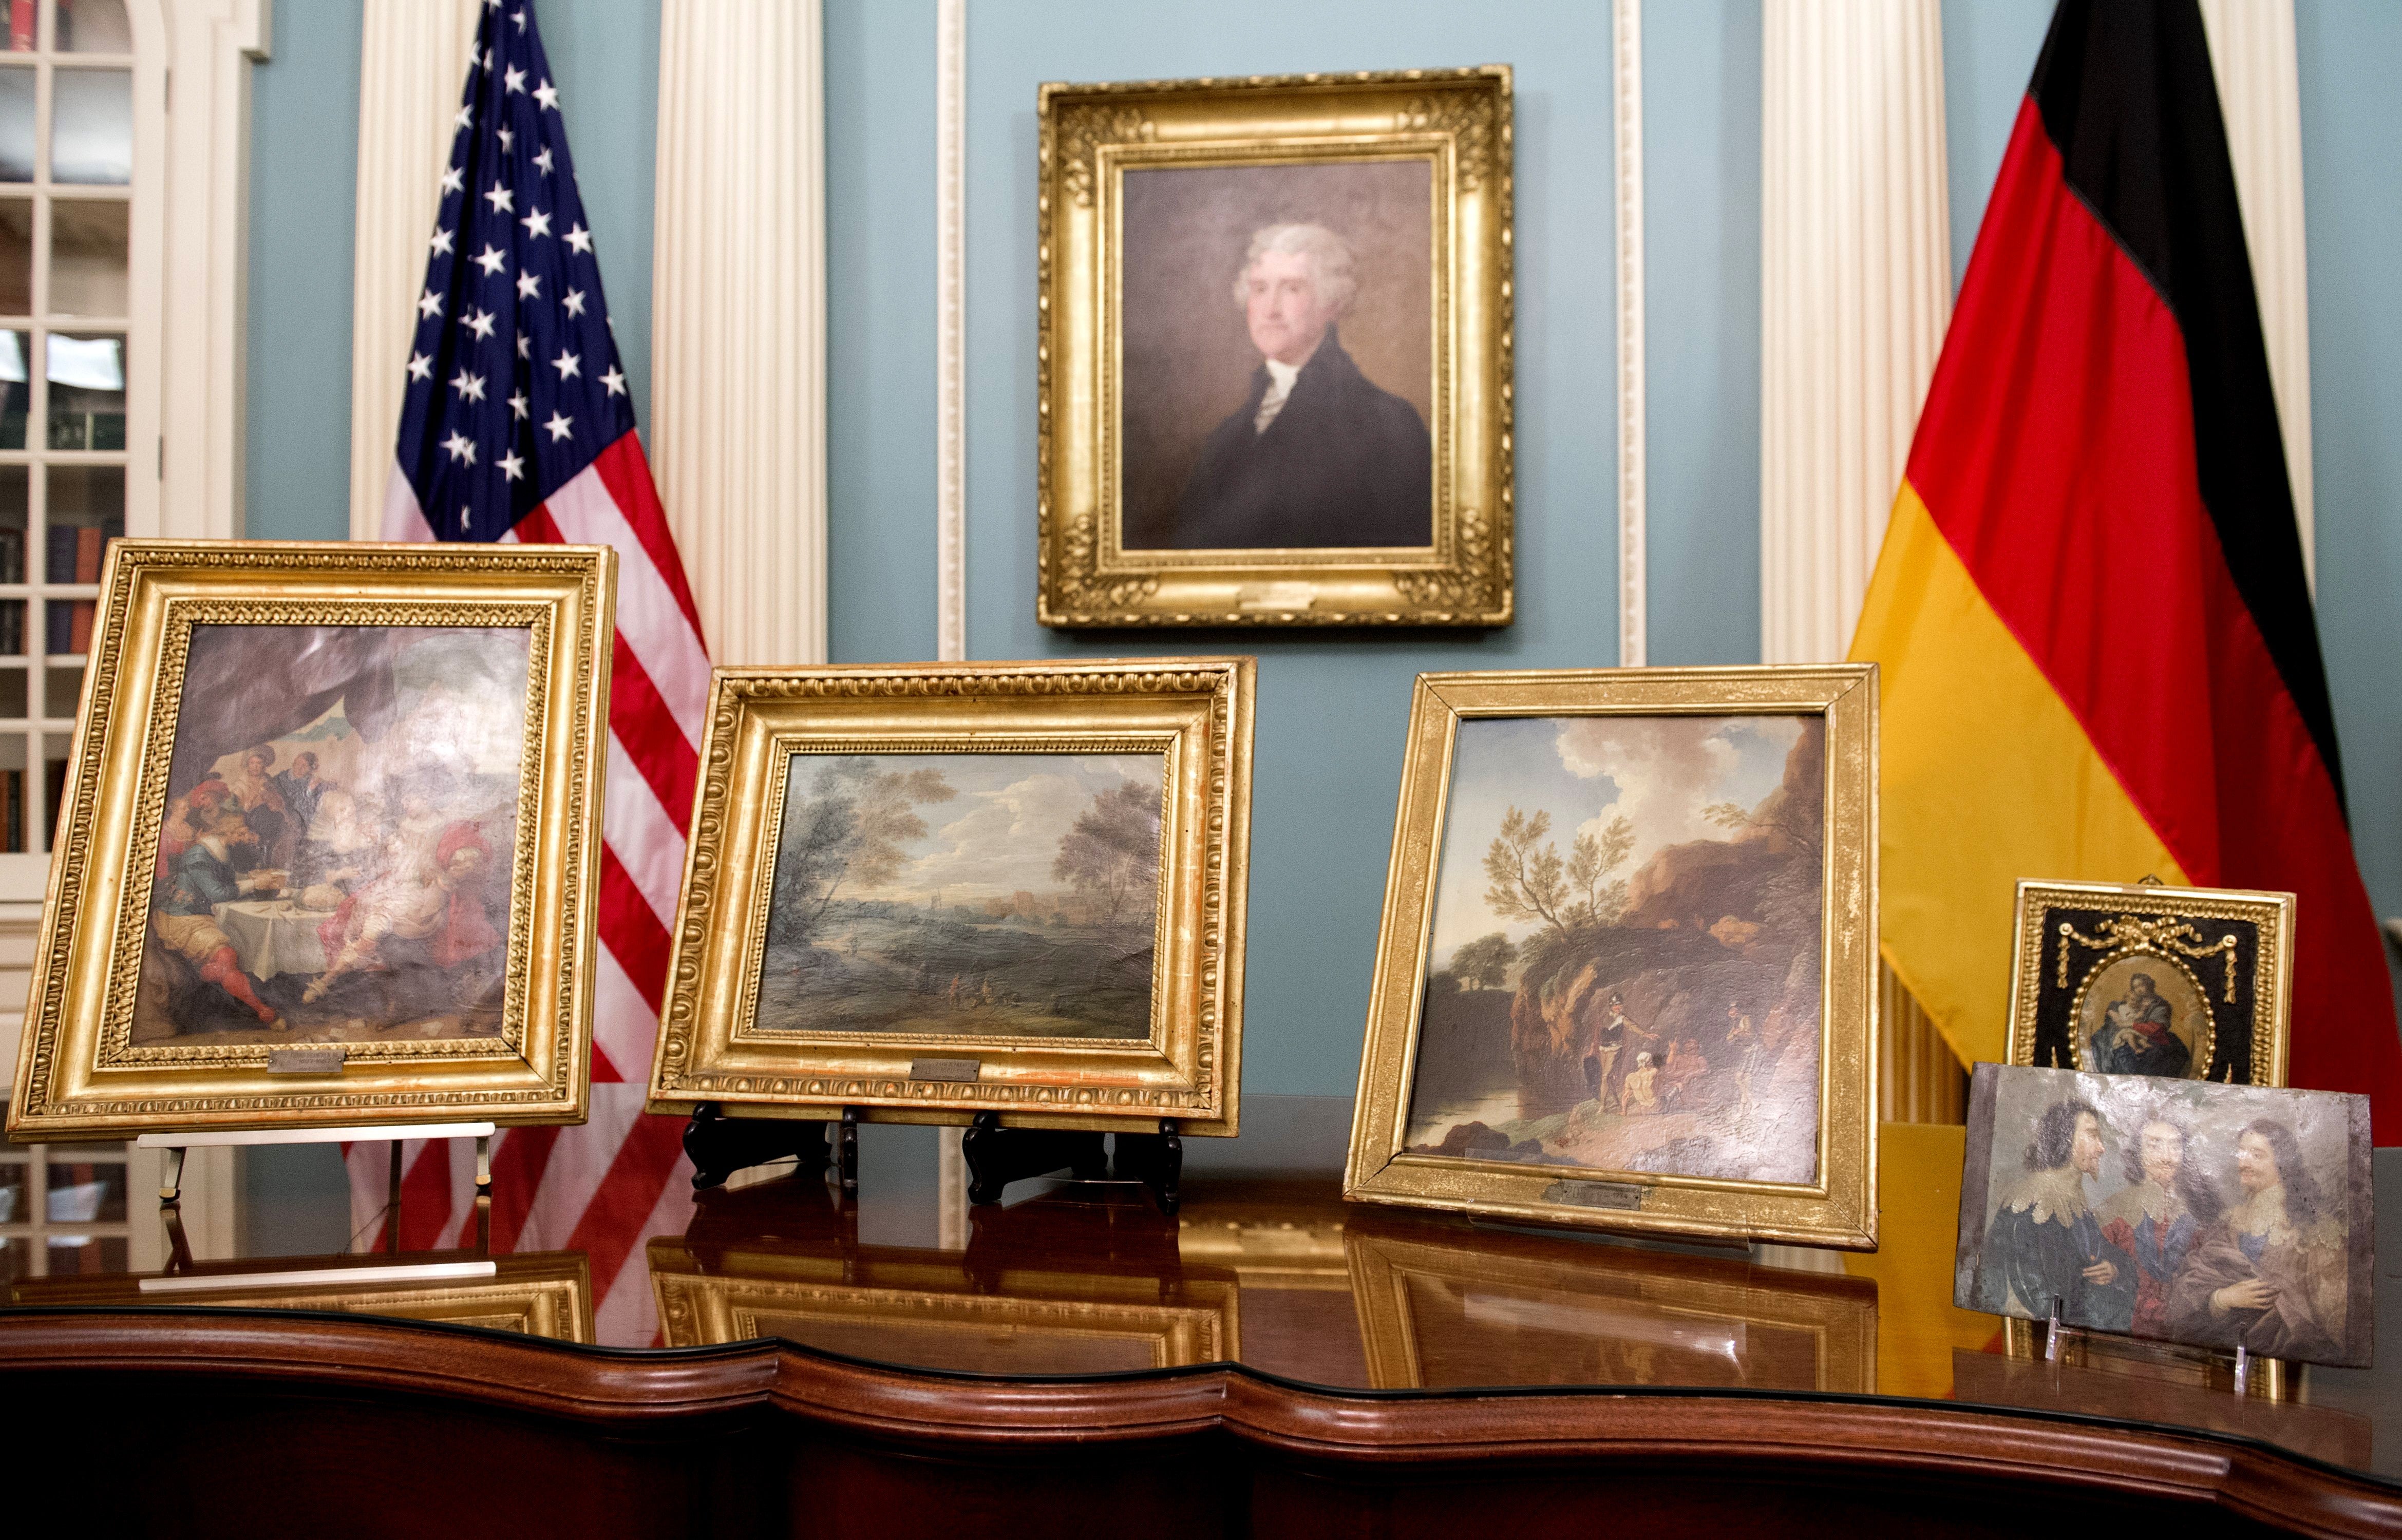 Five paintings that were returned to Germany in cooperation with the Monuments Men Foundation in 2015